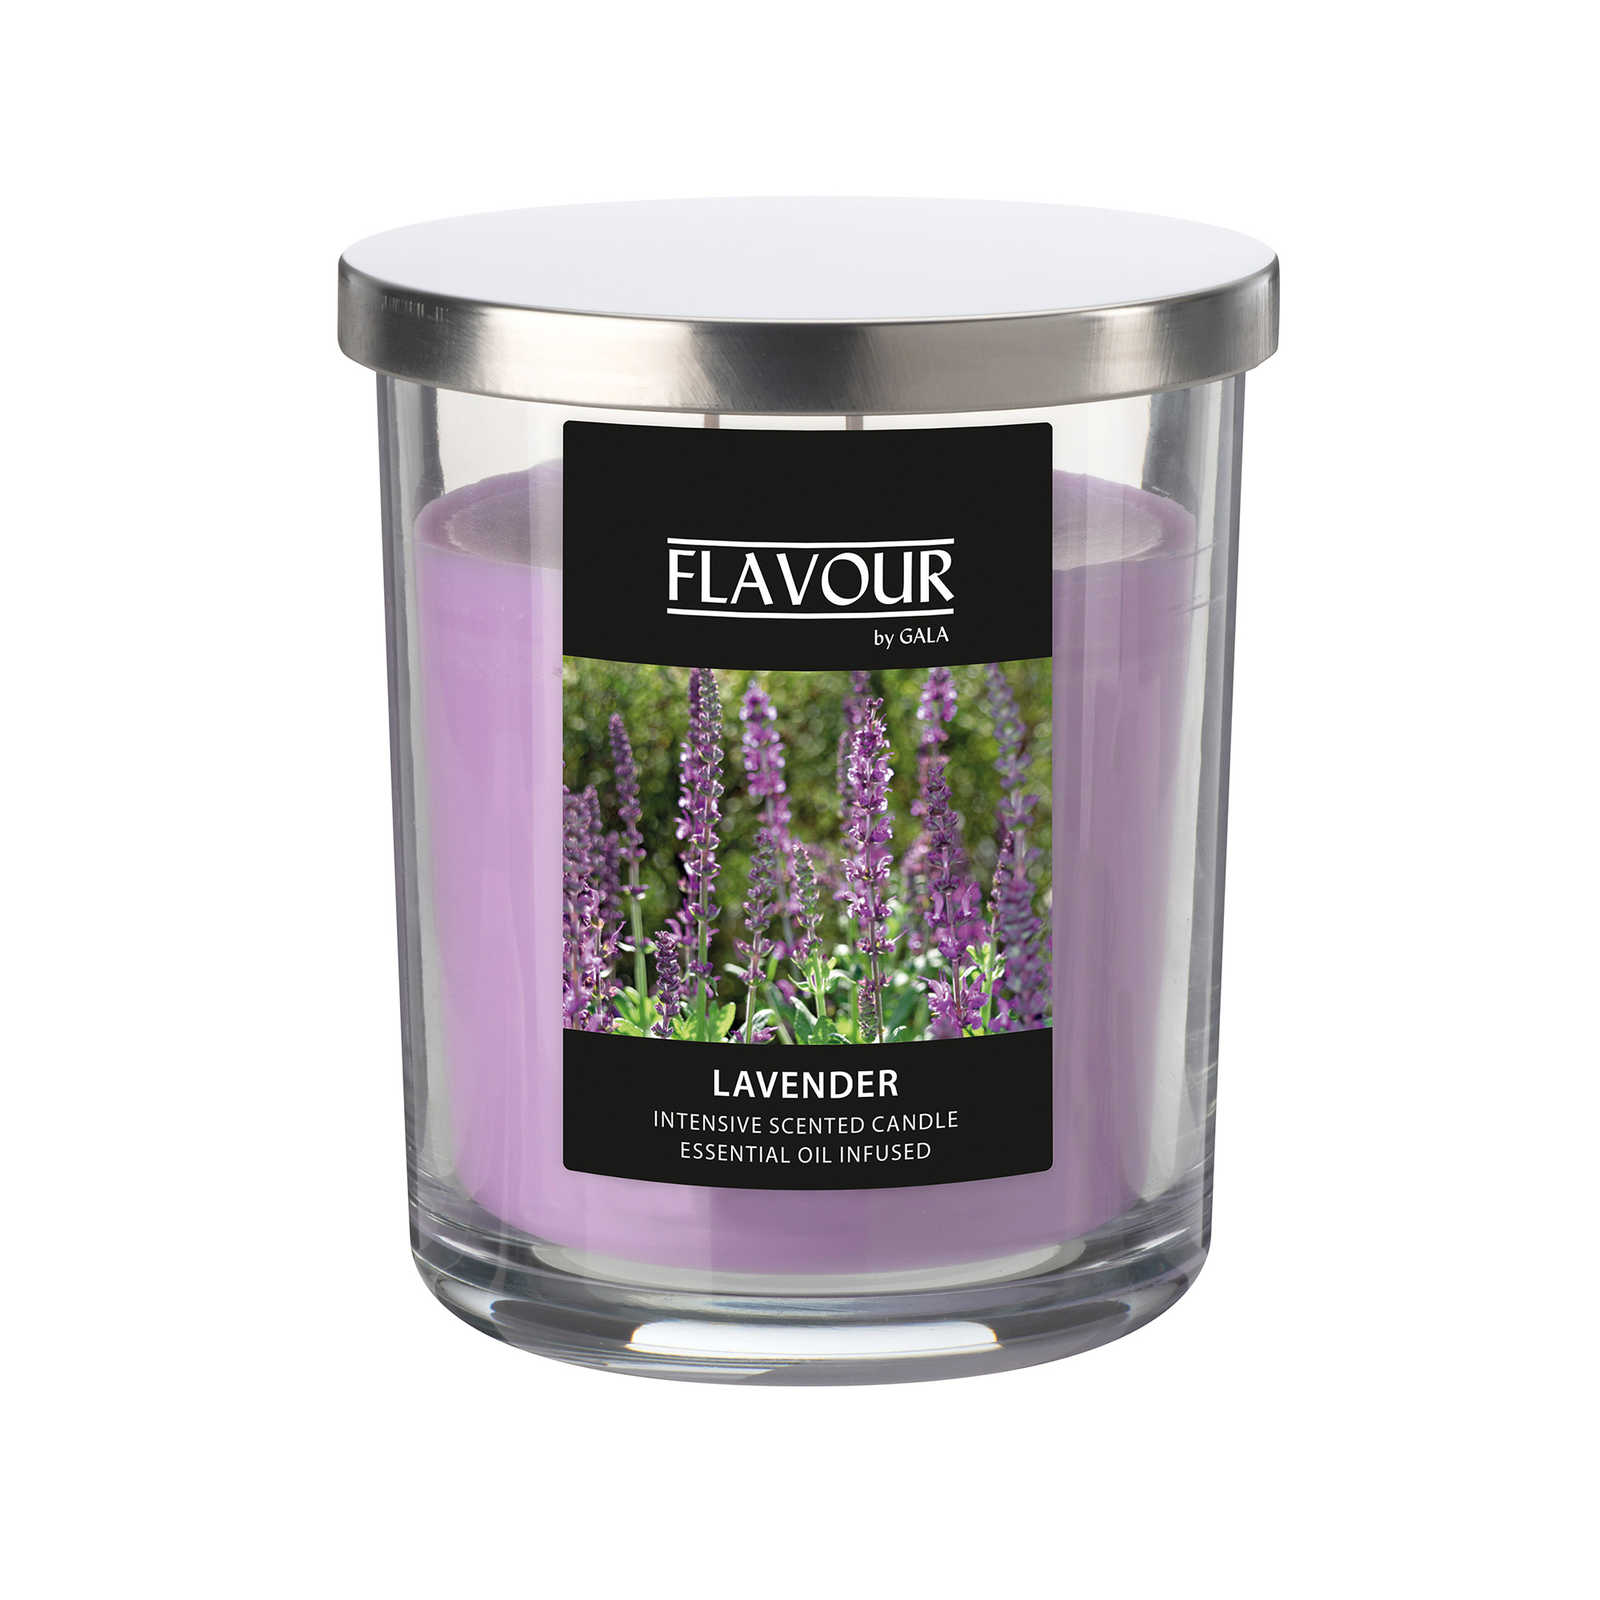         Lavender scented candle with delicate fragrance - 380g
    